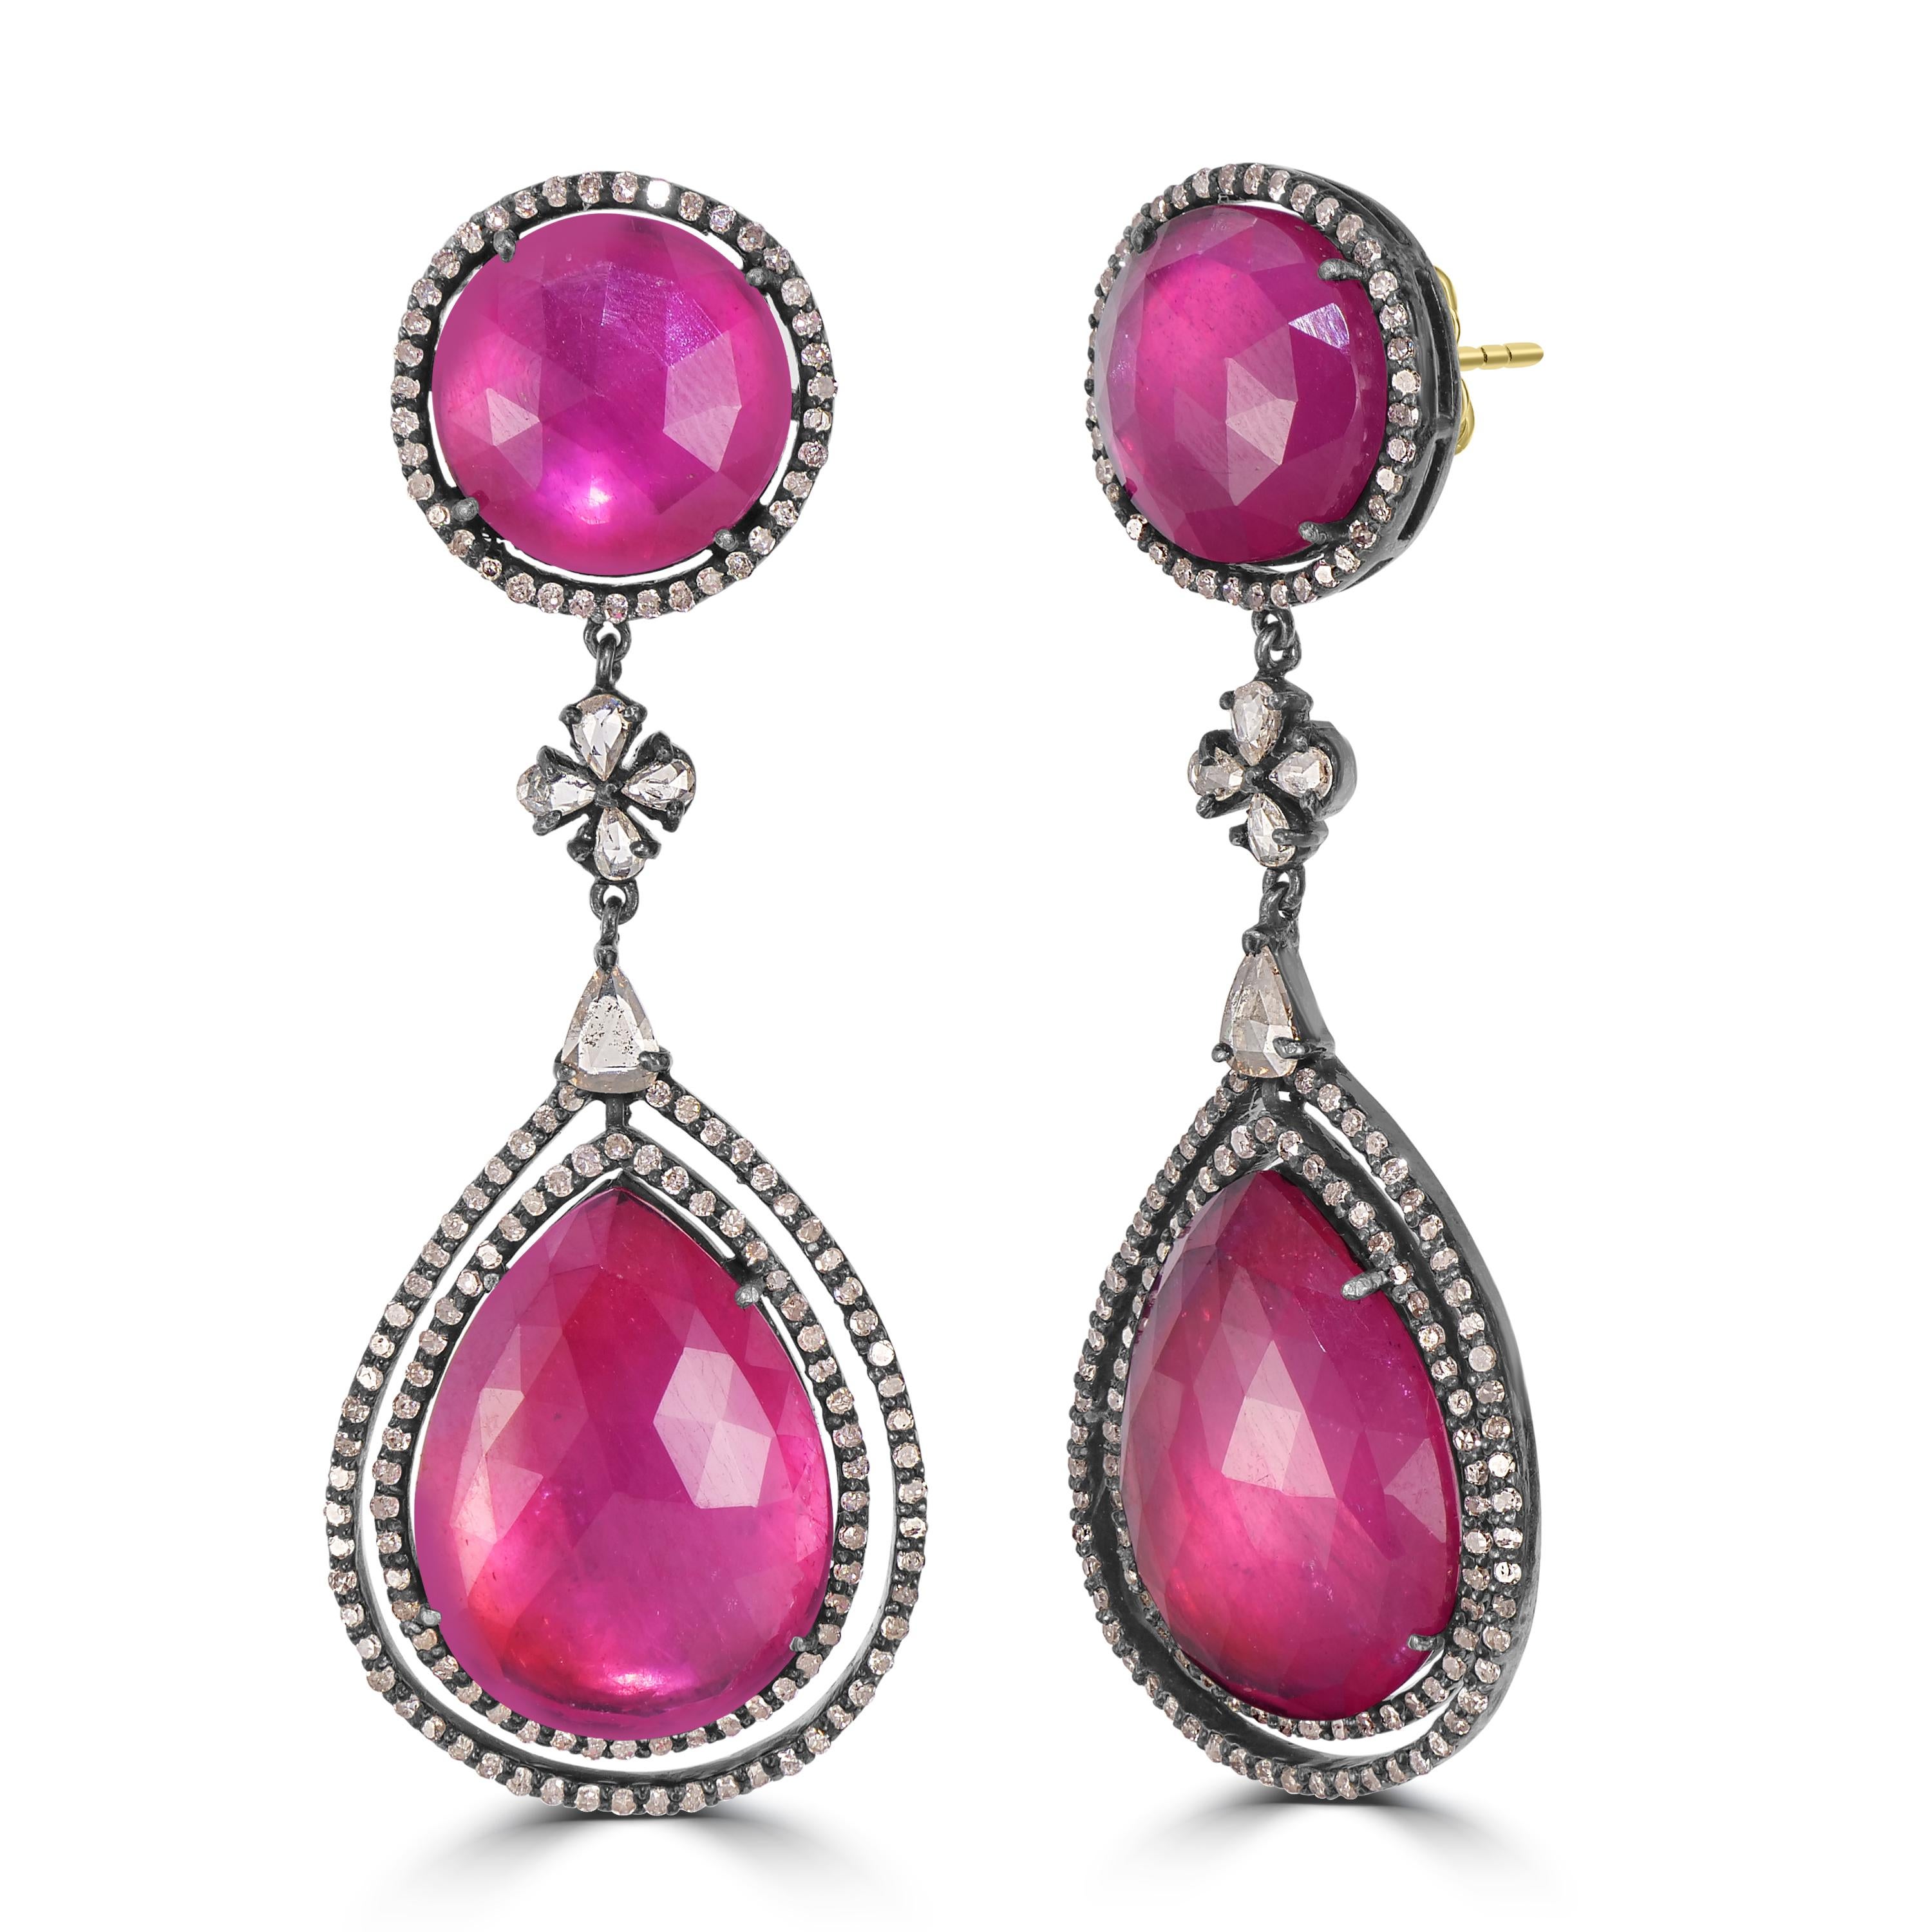 Embark on a journey into the resplendent world of Victorian glamour with our Victorian 39.62 Cttw. Ruby and Diamond Dangle Earrings, a symphony of regal design and exquisite craftsmanship. These earrings are a masterpiece of elegance, featuring a